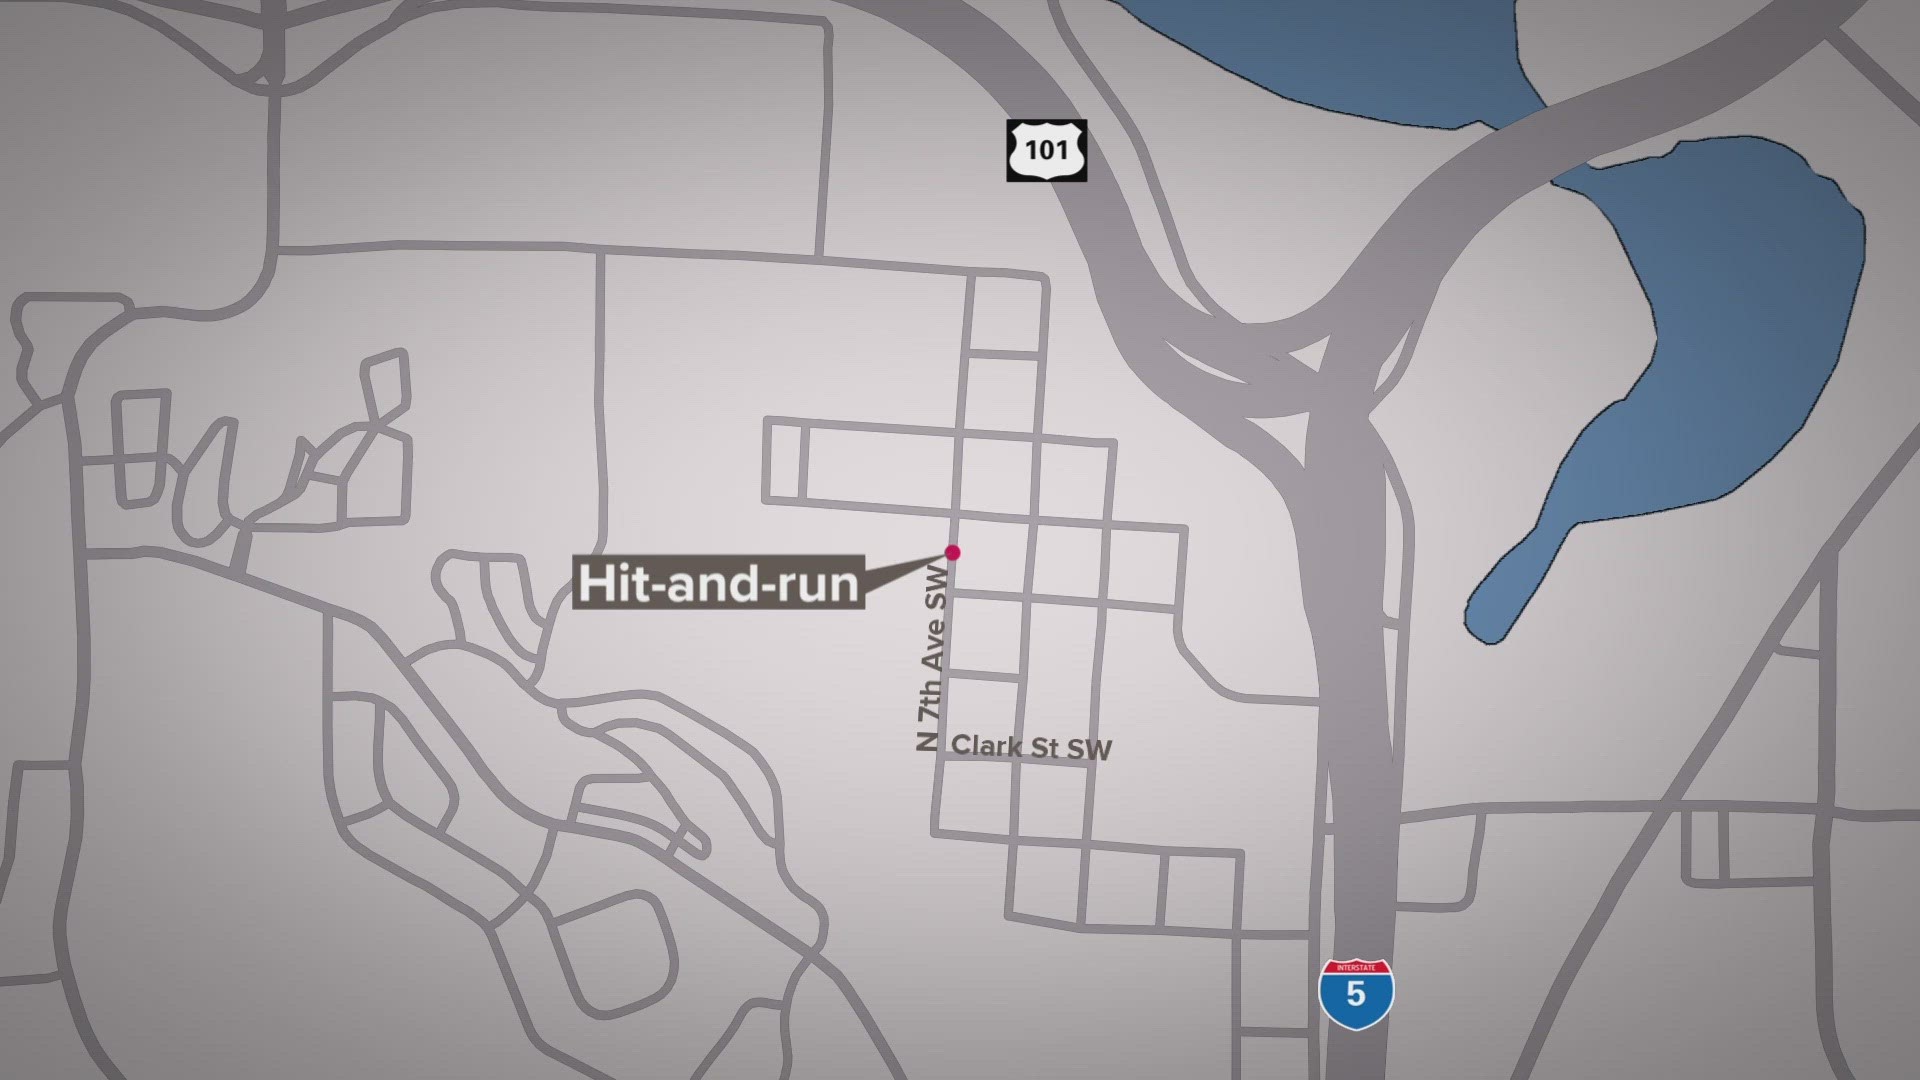 Tumwater police said a pedestrian was struck and killed by a driver on Tuesday night.